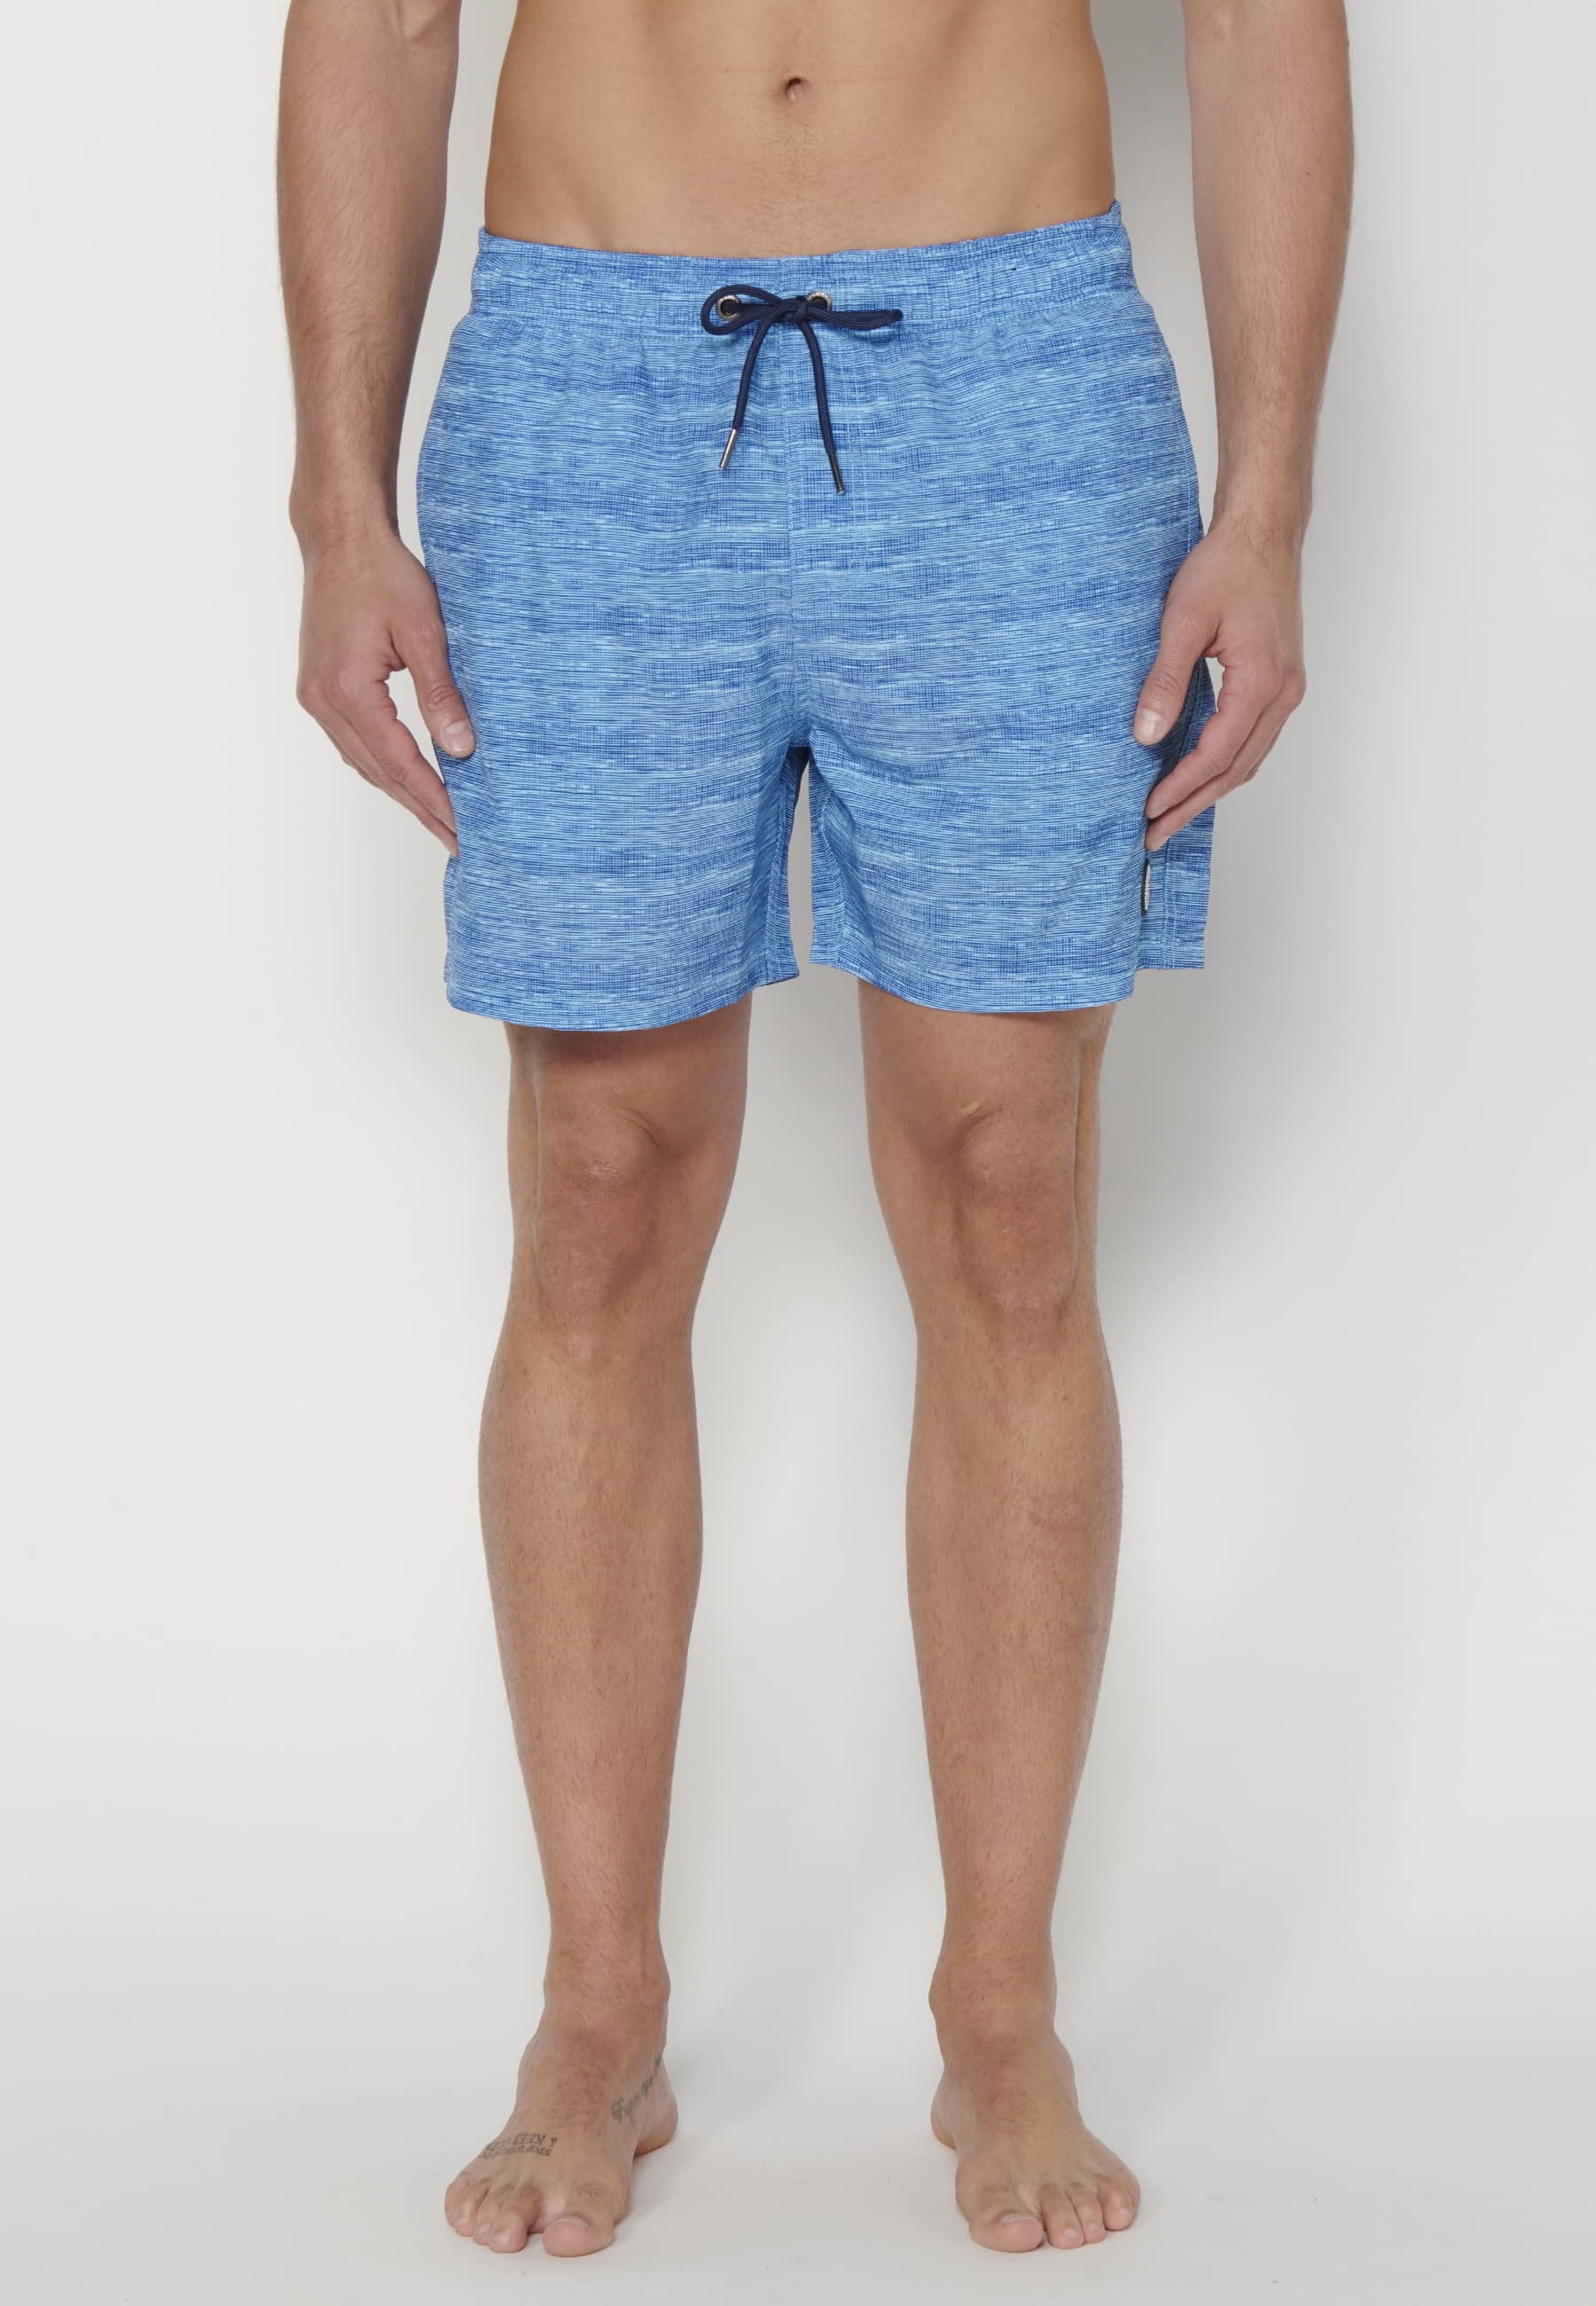 Short swimsuit with three Pockets in Aqua Blue color for Men